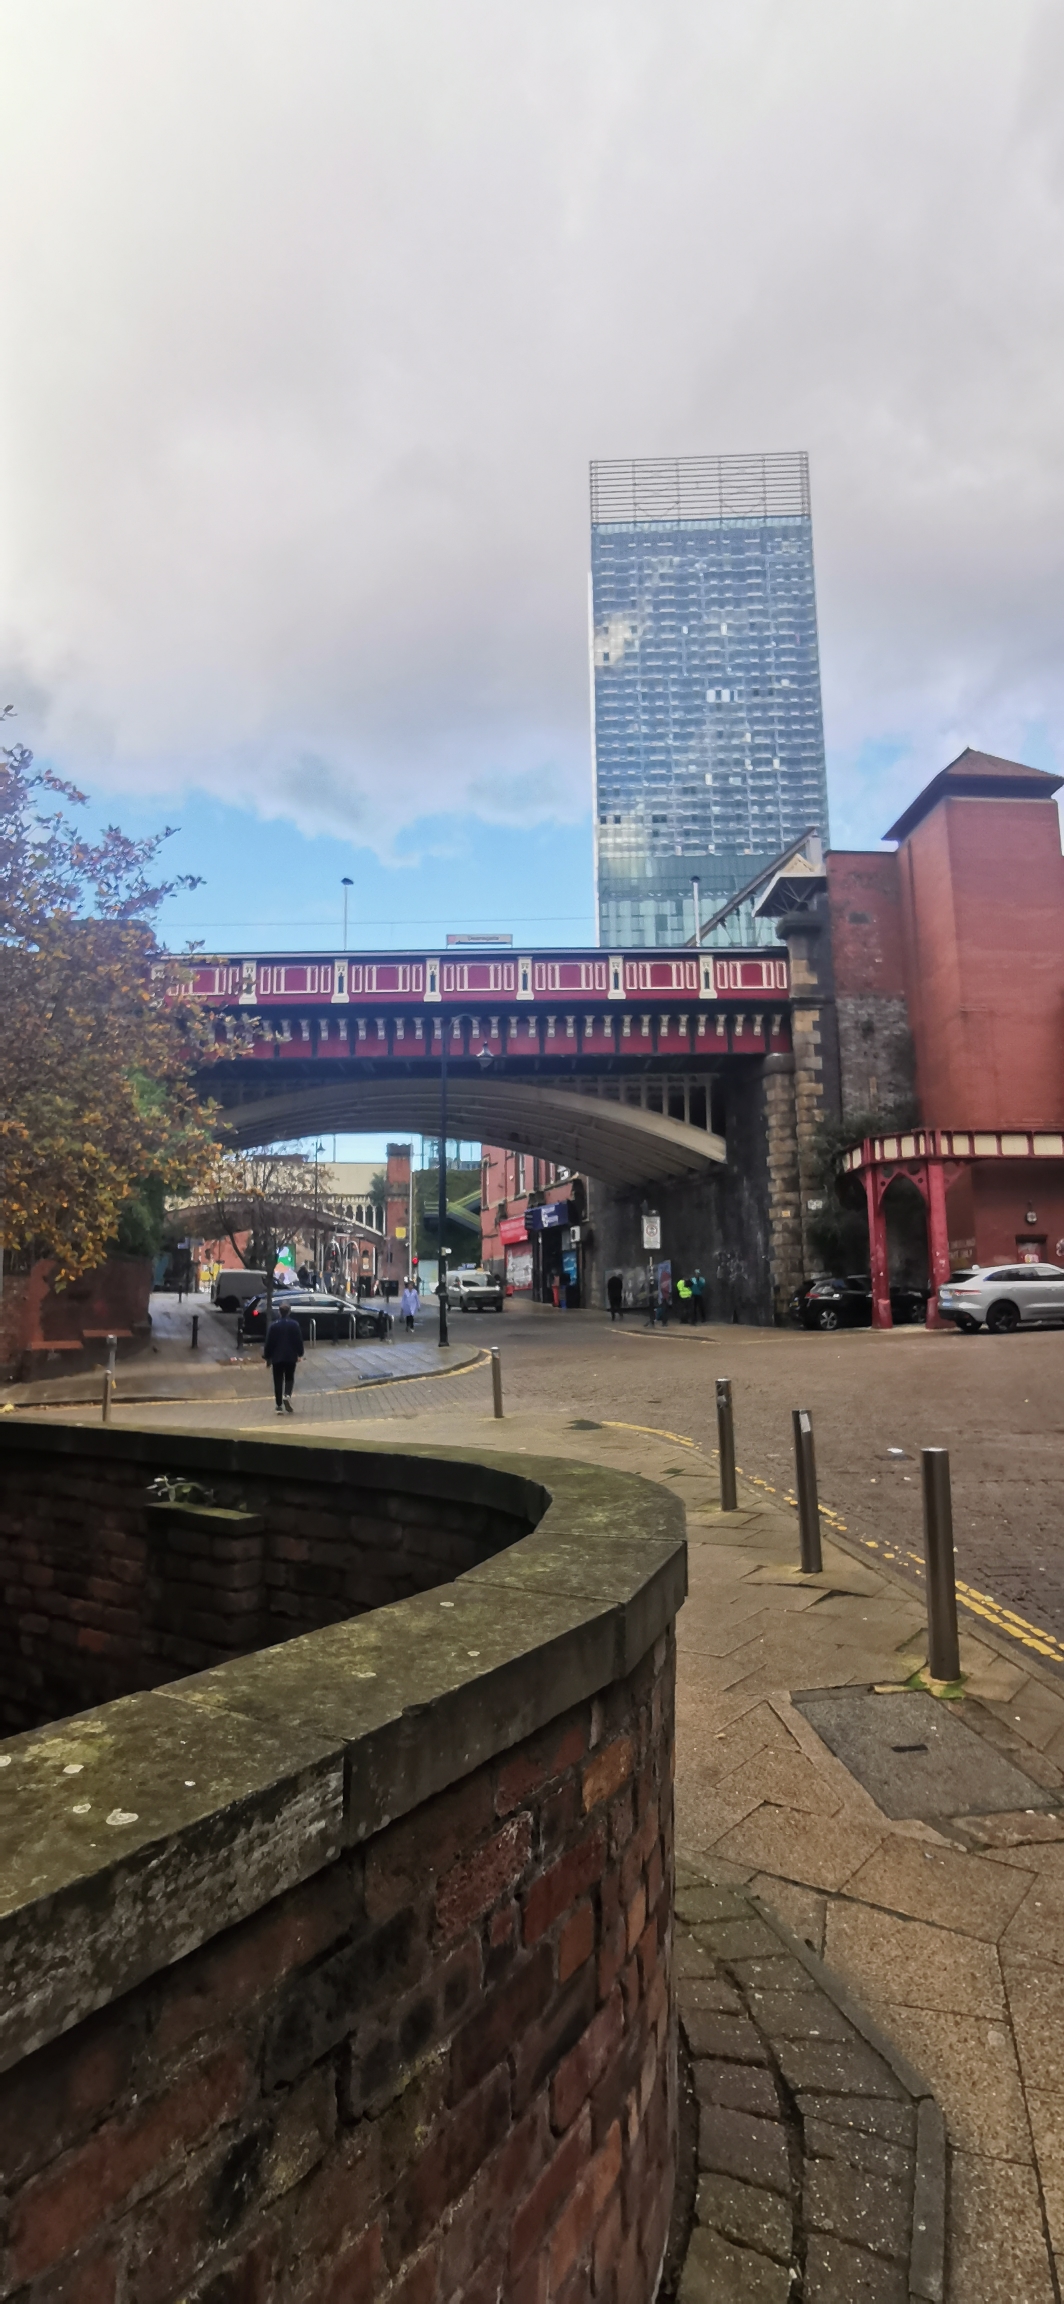 Photo taken between Deansgate Square and Deansgate Station